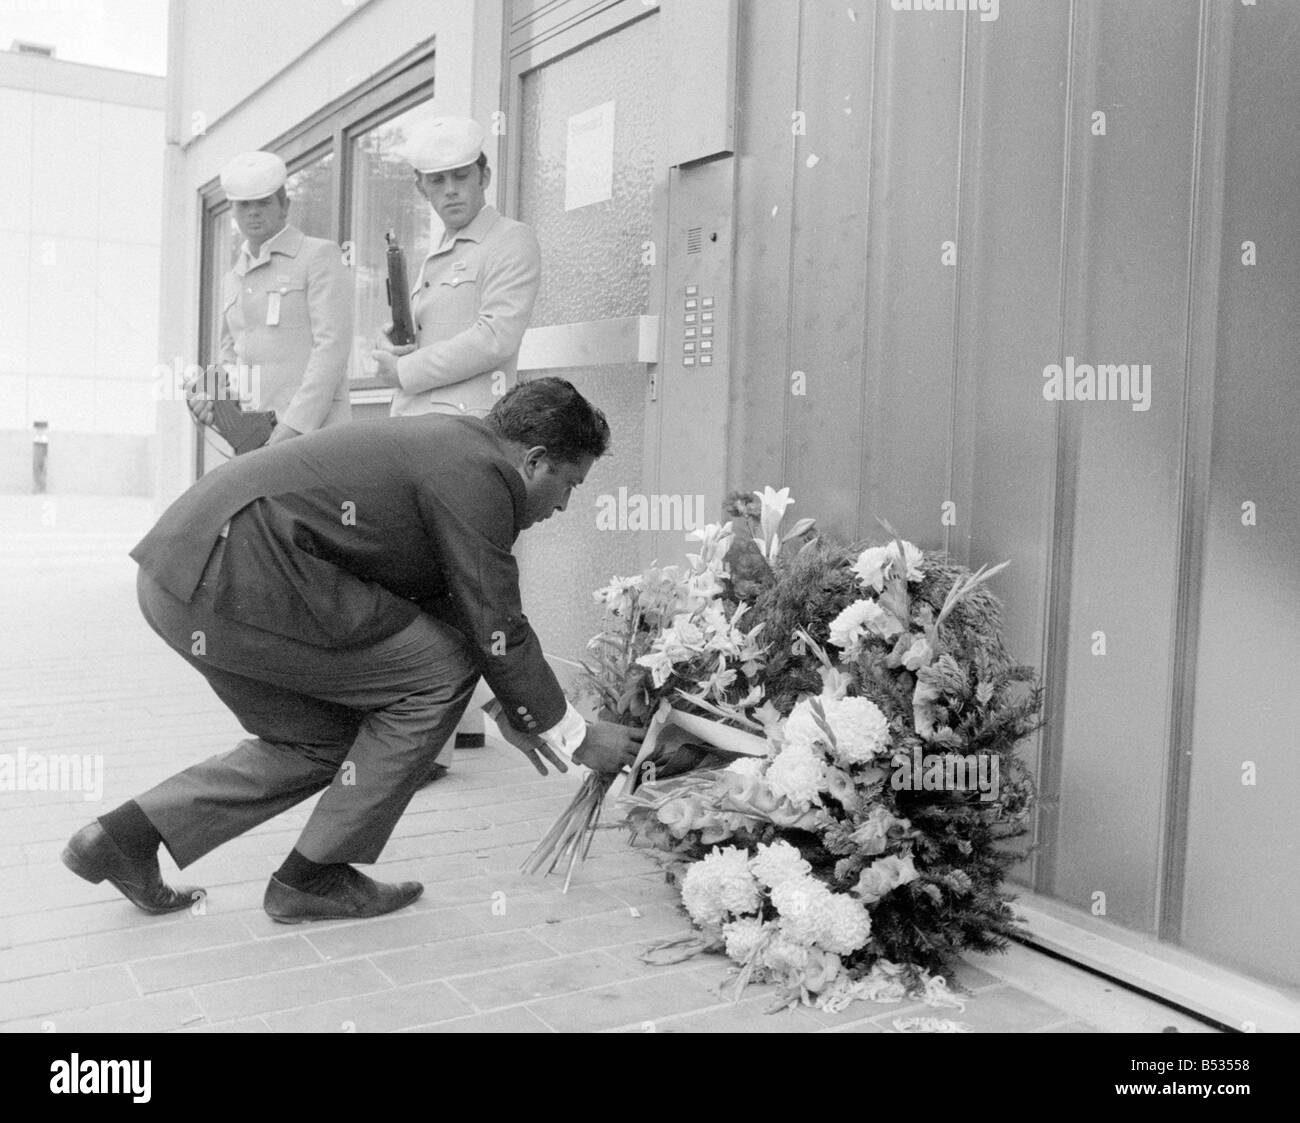 A Pakistani Olympic offical leaves a wreath outside the Israeli H.Q. in the Olympic Village following the murder of 11 Israeli athlete's by Arab terrorists;72 8776;Fresco ;DM Stock Photo